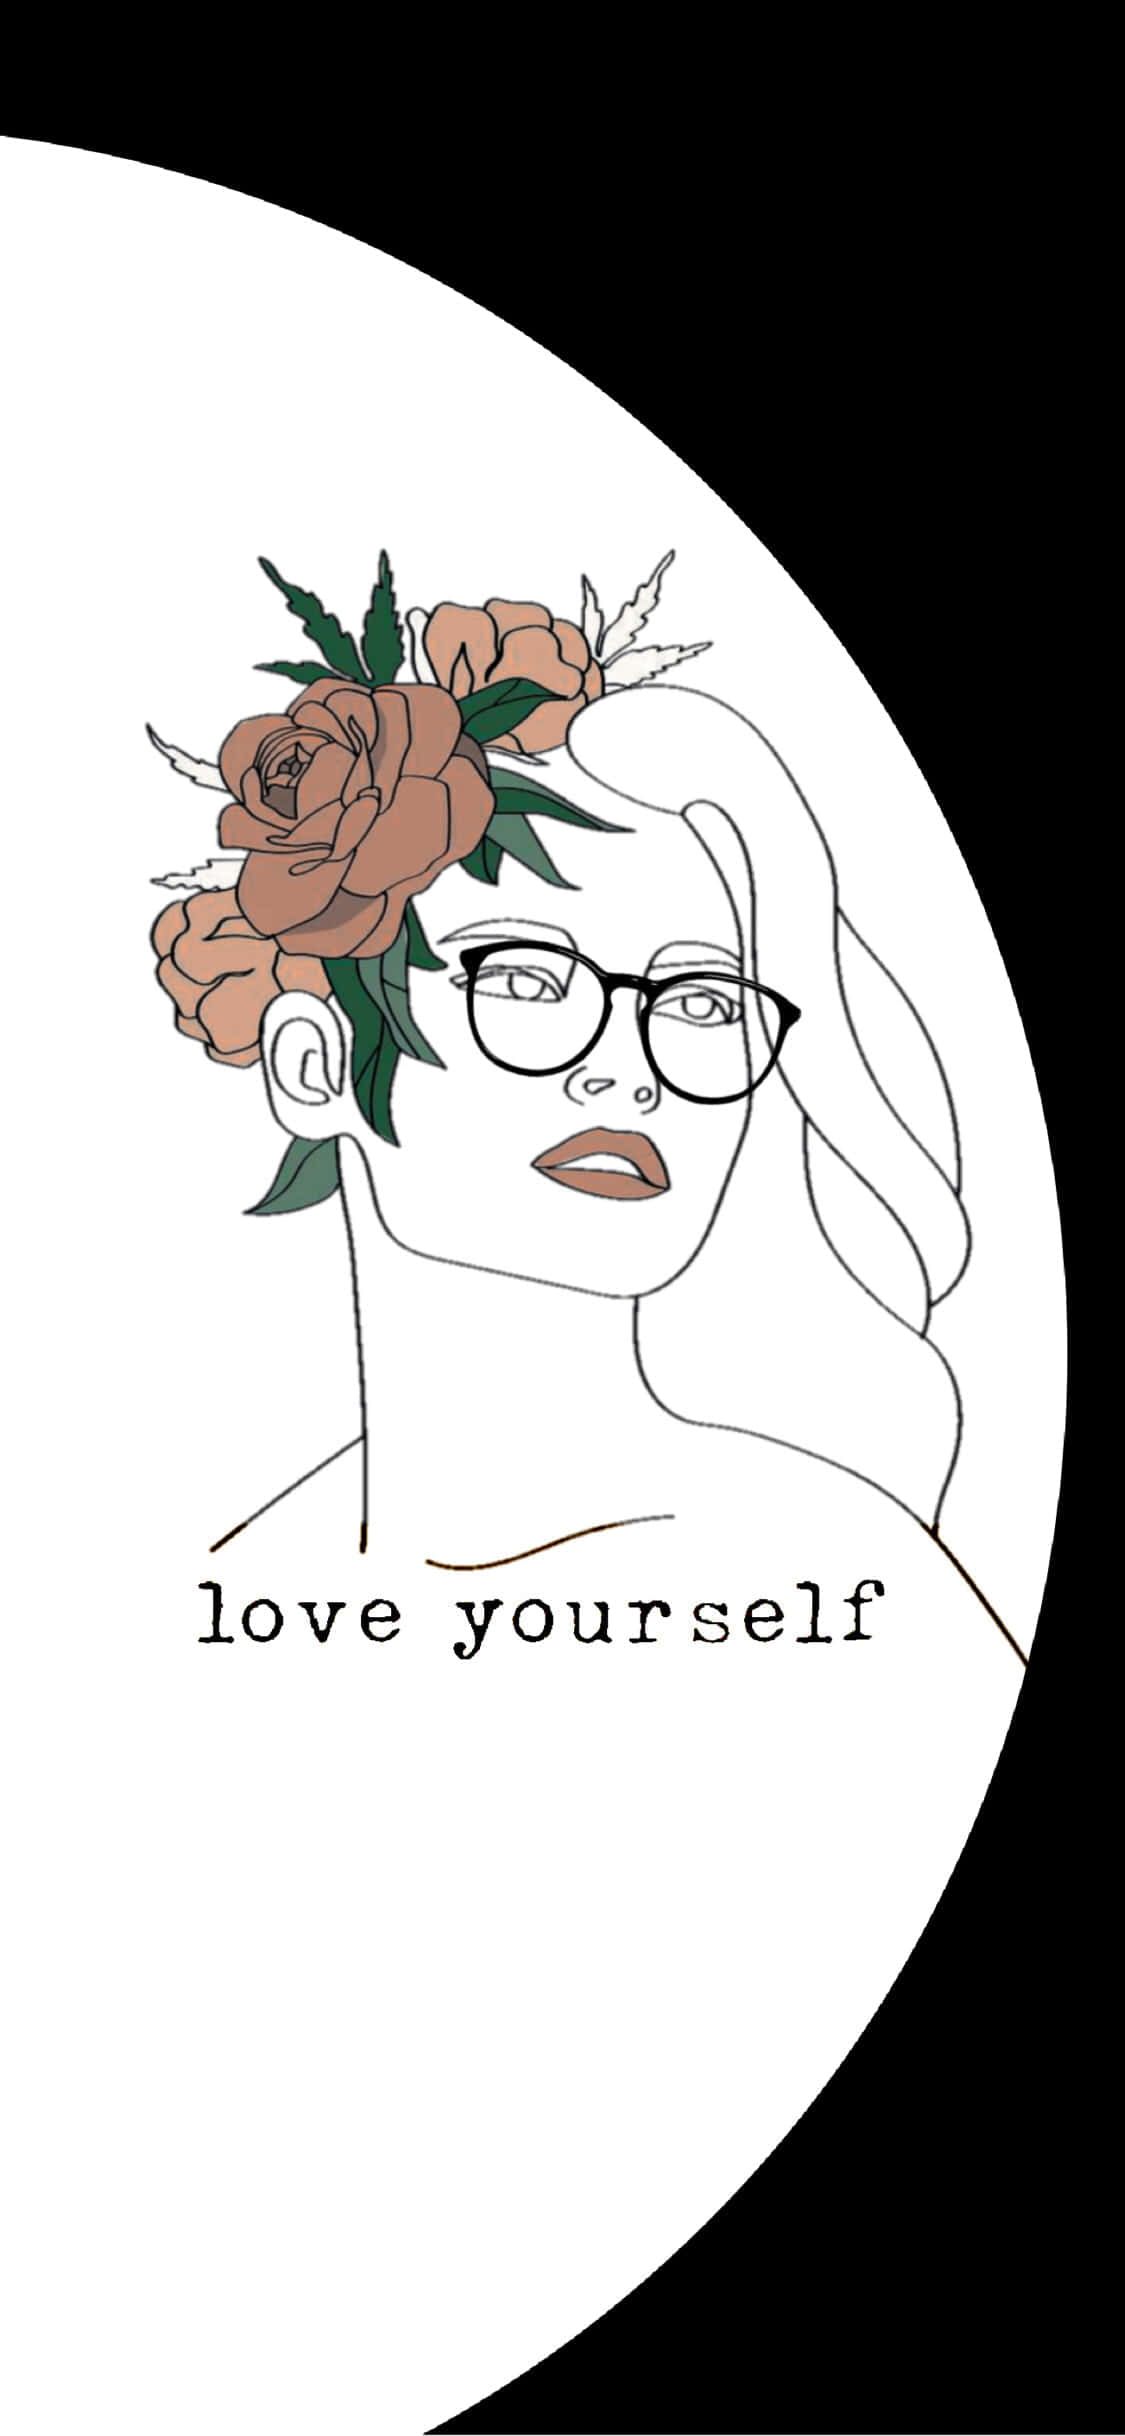 Love Yourself - Embrace Positivity and Inner Growth Wallpaper